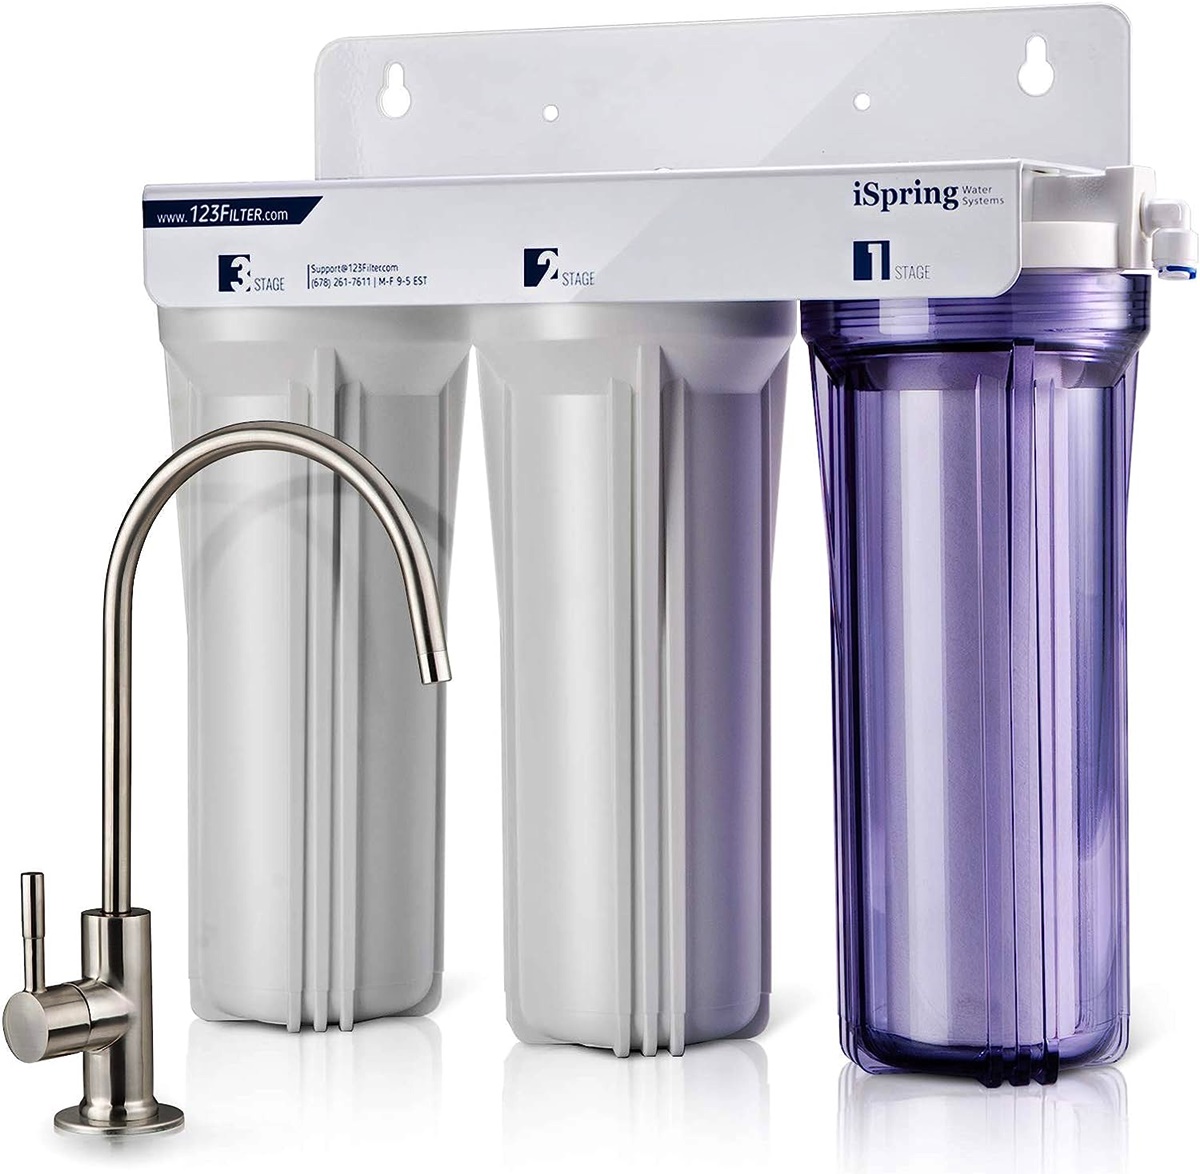 How Much Does A Reverse Osmosis Water Filter Cost